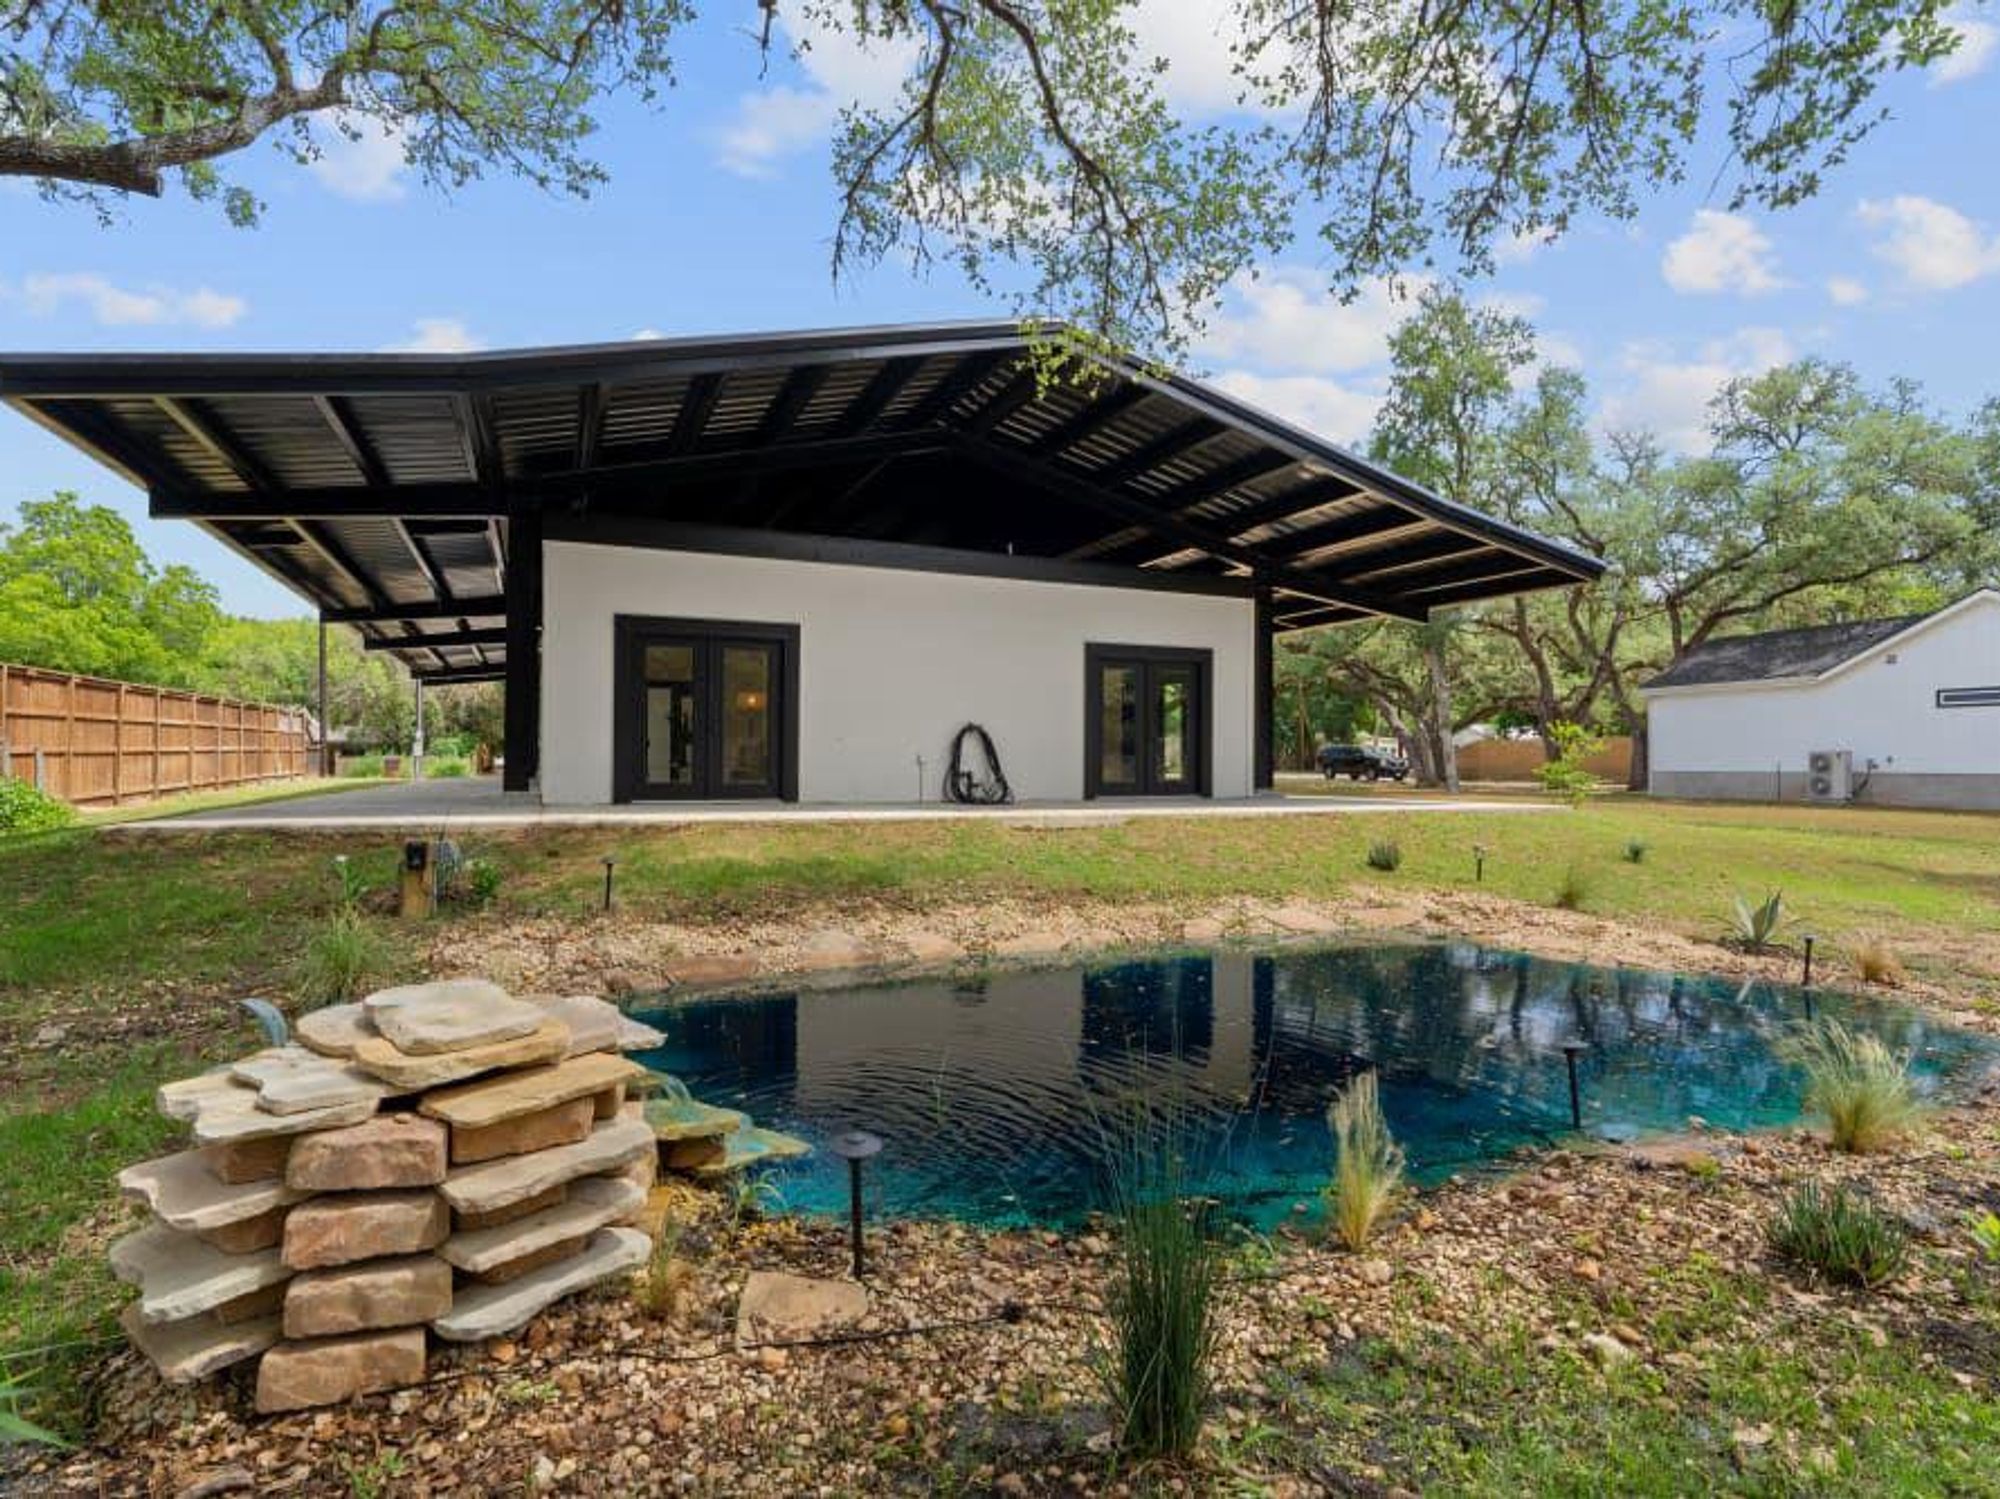 The 2,048-square-foot, ranch-style home, called Lockhart Modern Love, features three bedrooms and two bathrooms.